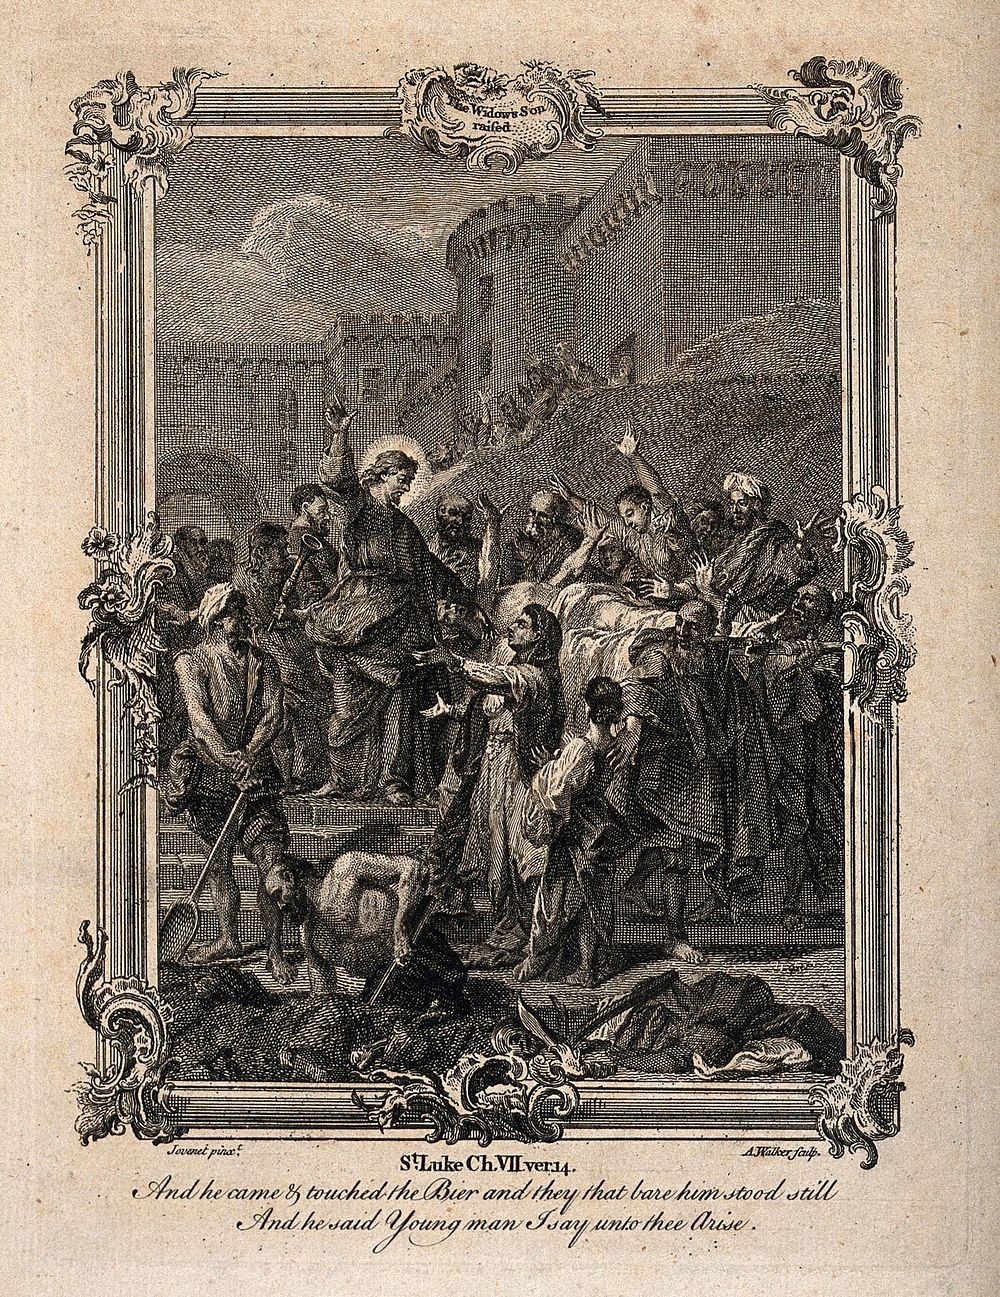 Christ raises the widow's son from the dead. Etching by A. Walker after J-B. Jouvenet.